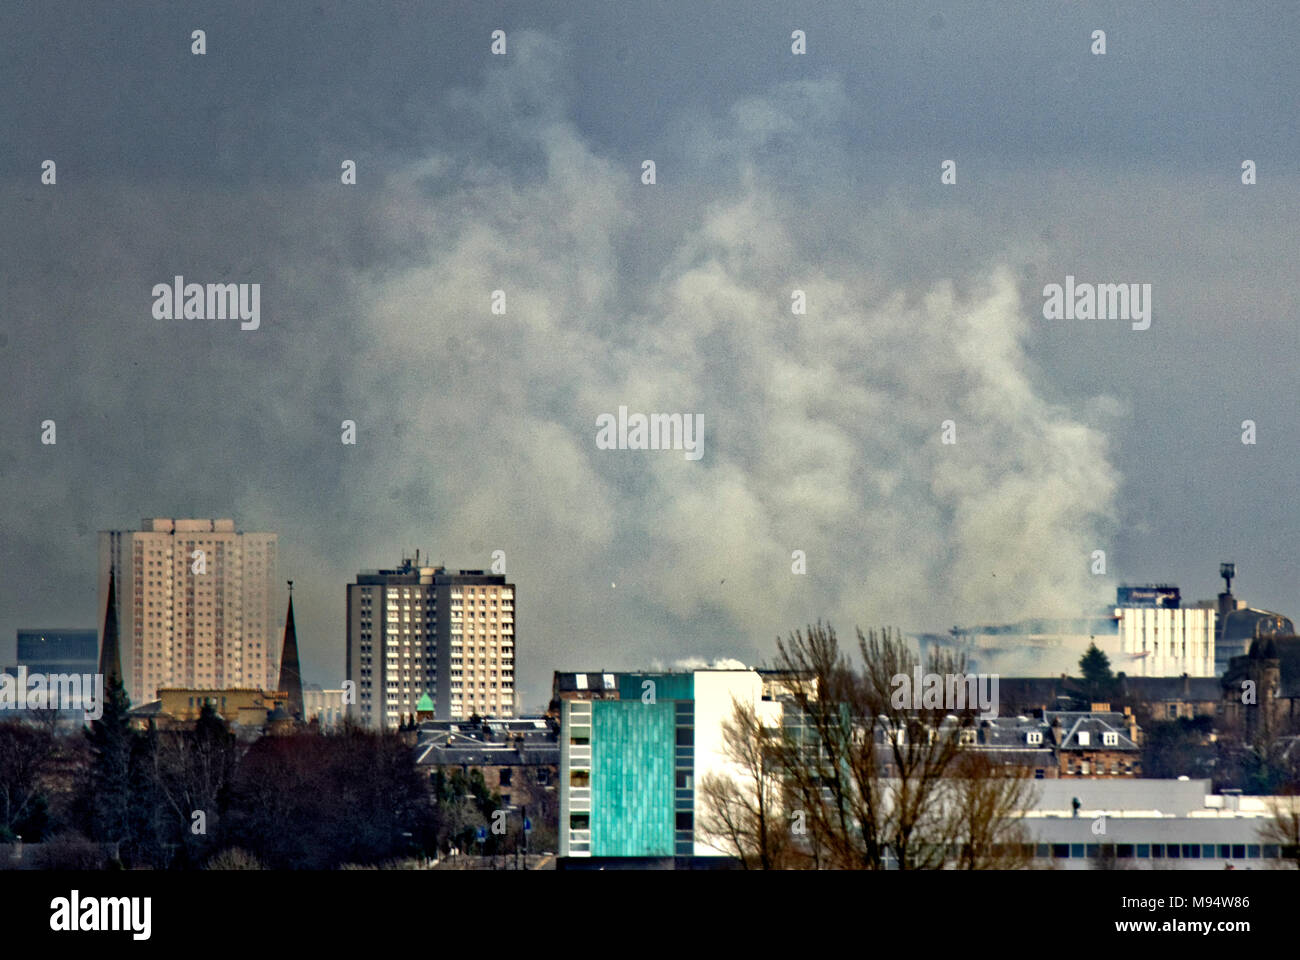 Glasgow, Scotland, UK  22nd March. The city centre is engulfed in reported asbestos filled smoke as a  massive blaze in sauchiehalll street in the heart of the city seen from seven miles away. Credit: Gerard Ferry/Alamy news Stock Photo